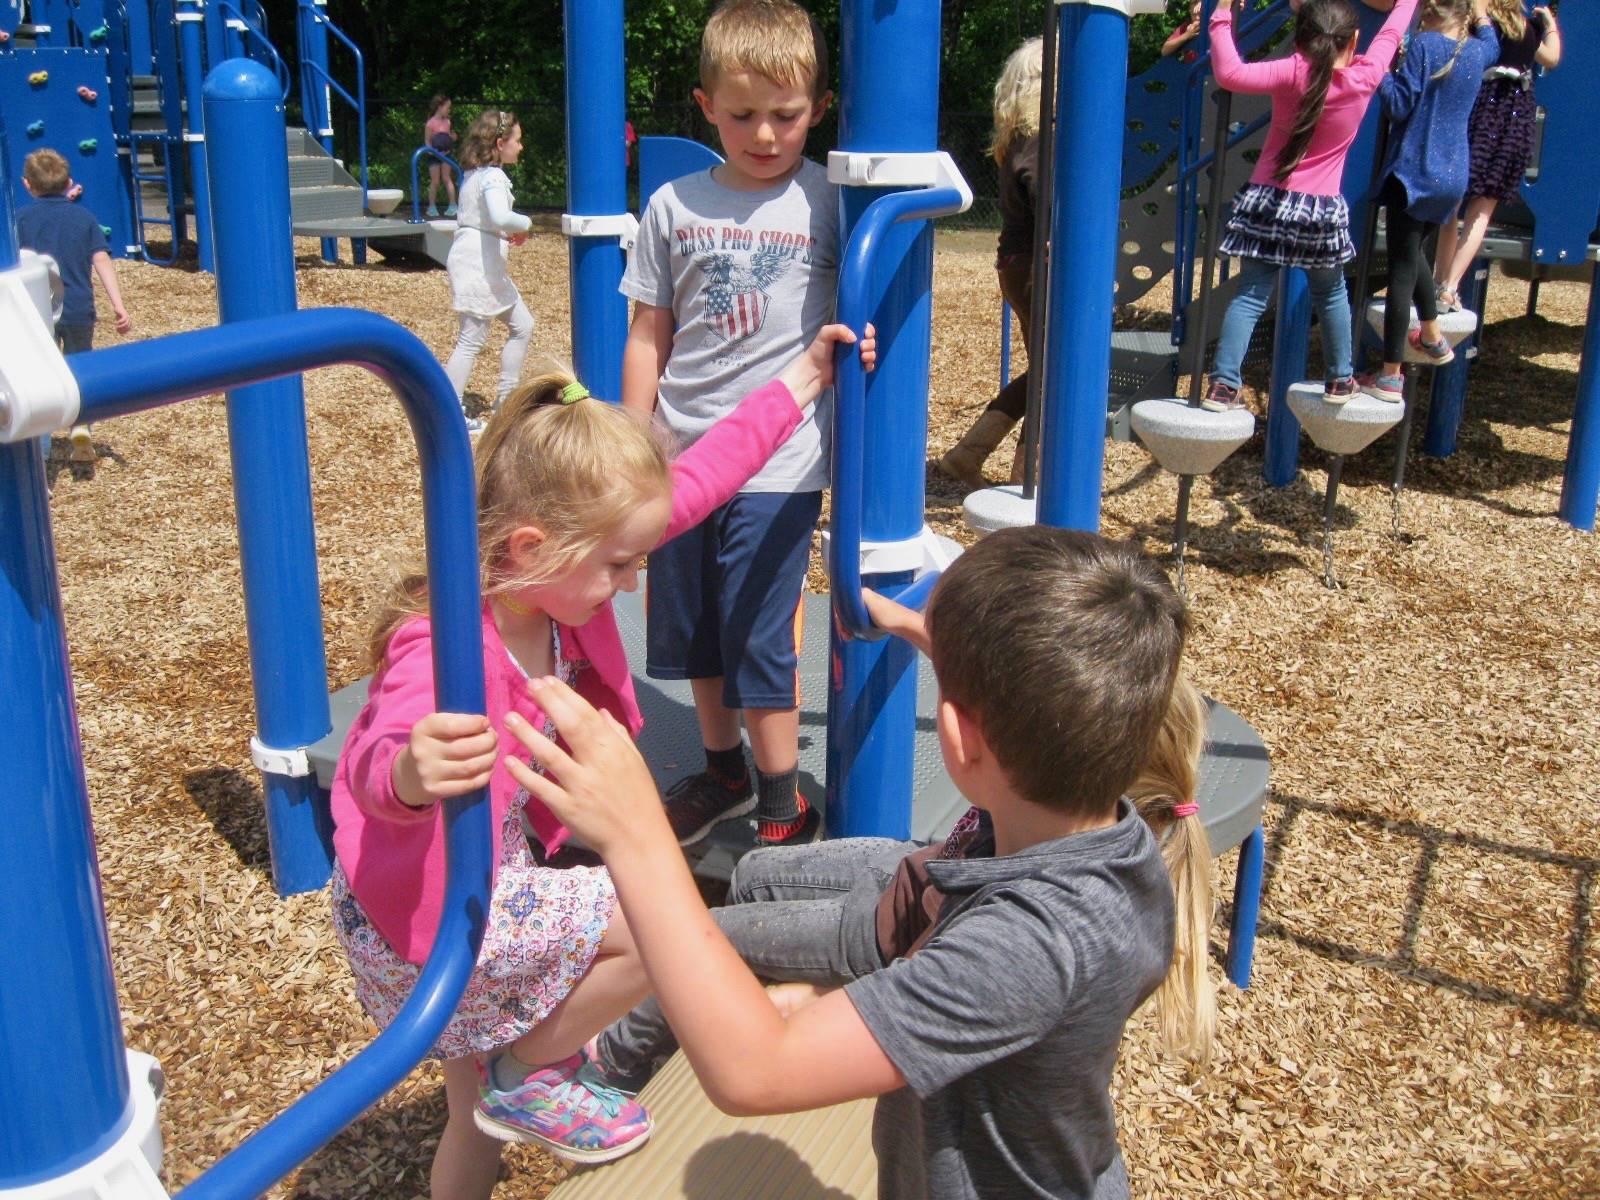 Students playing on playground.